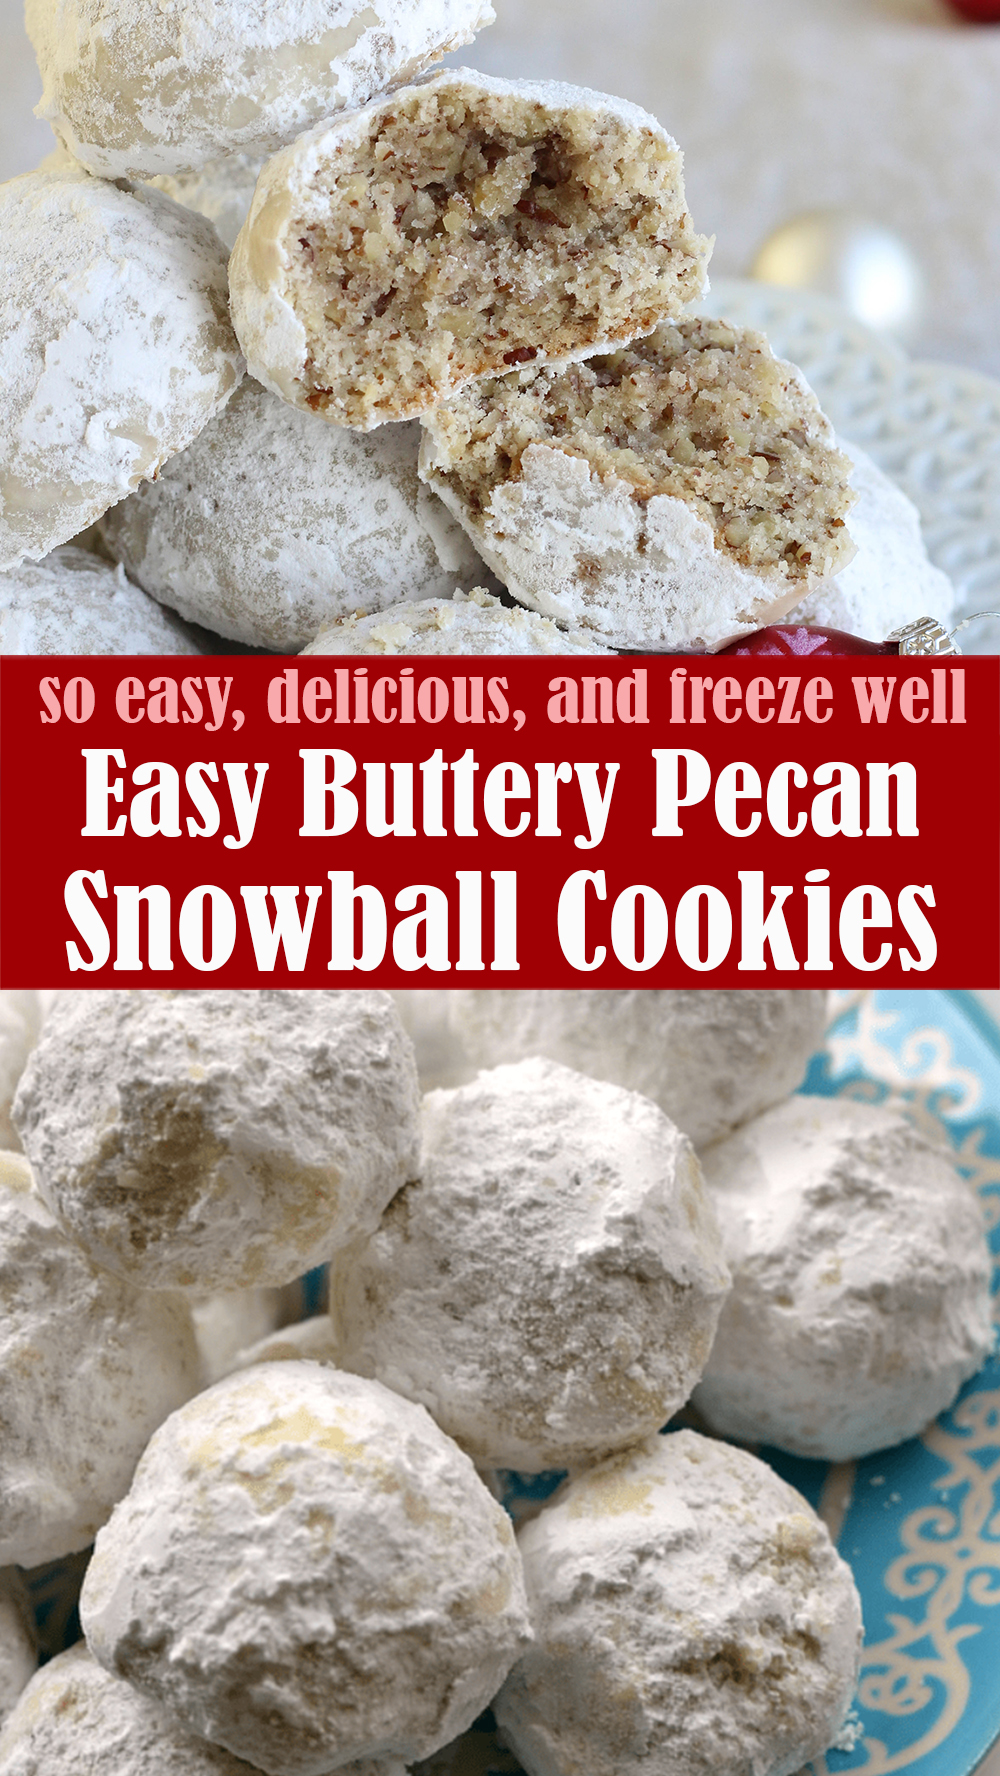 Easy Buttery Pecan Snowball Cookies